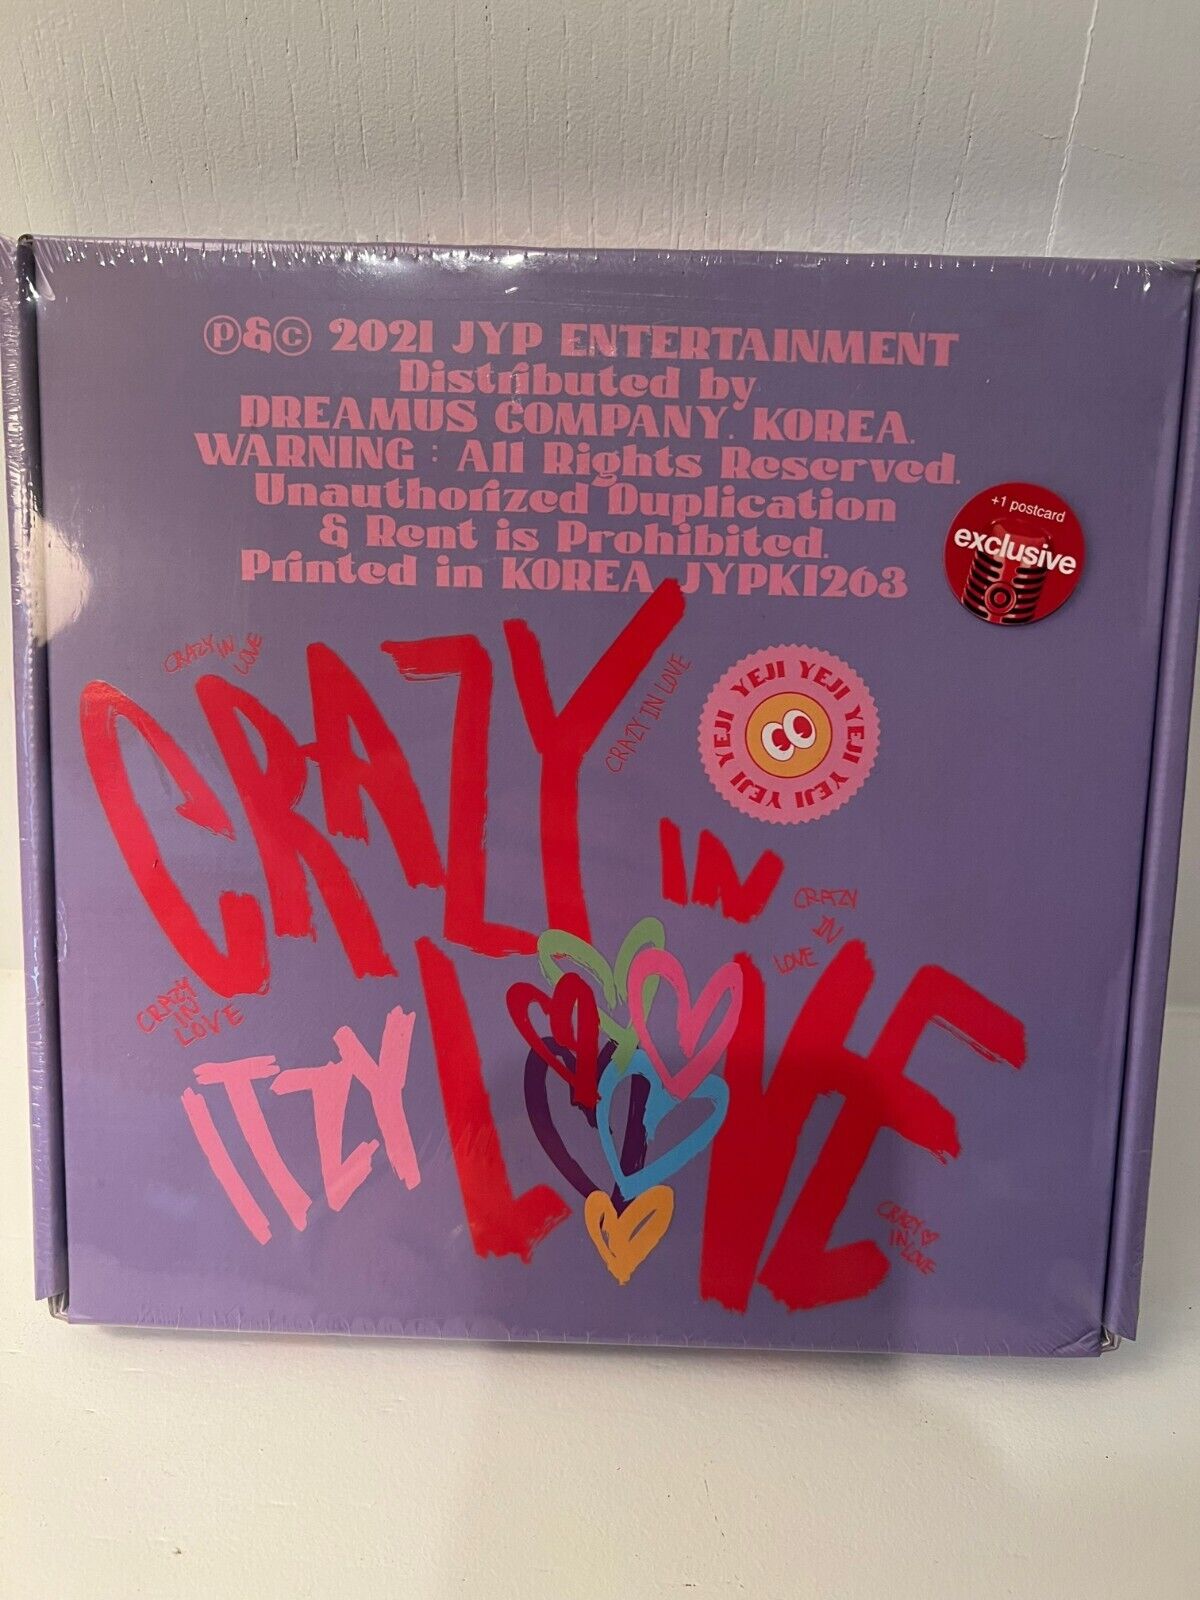 ITZY CRAZY IN LOVE ALBUM + Postcard Target Exclusive Edition Sealed Any Edition